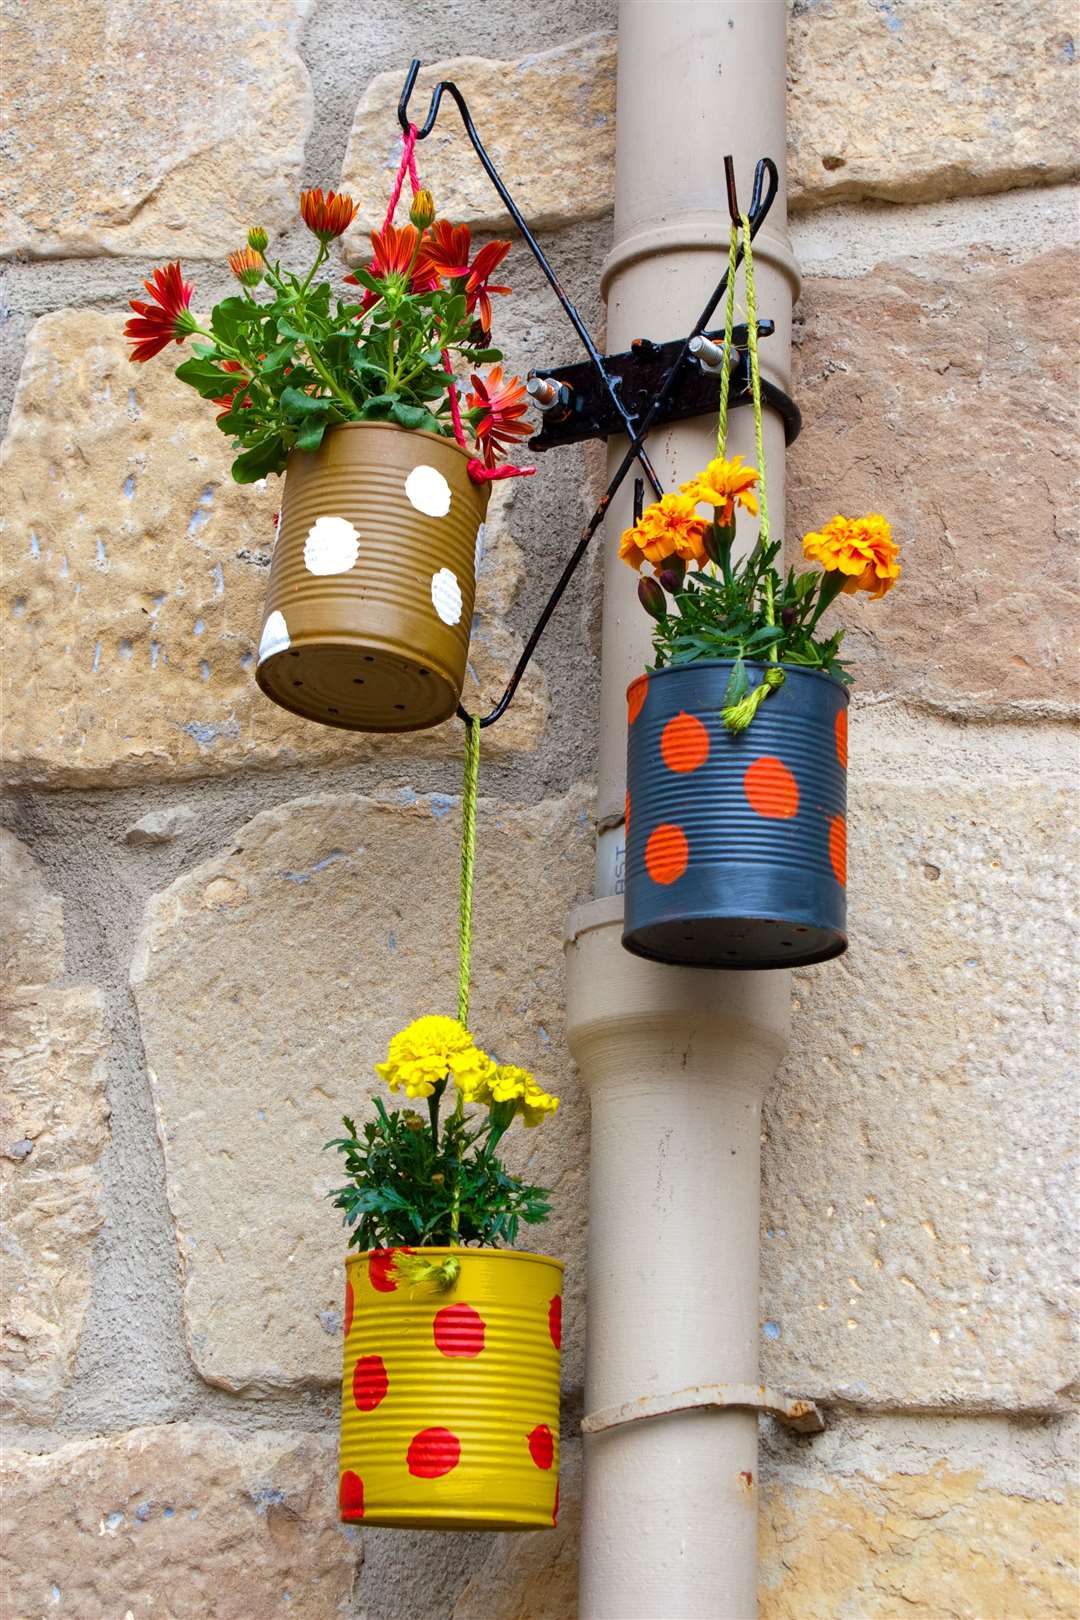 Old cans could be painted and made into attractive plant pots. Picture: iStock/PA